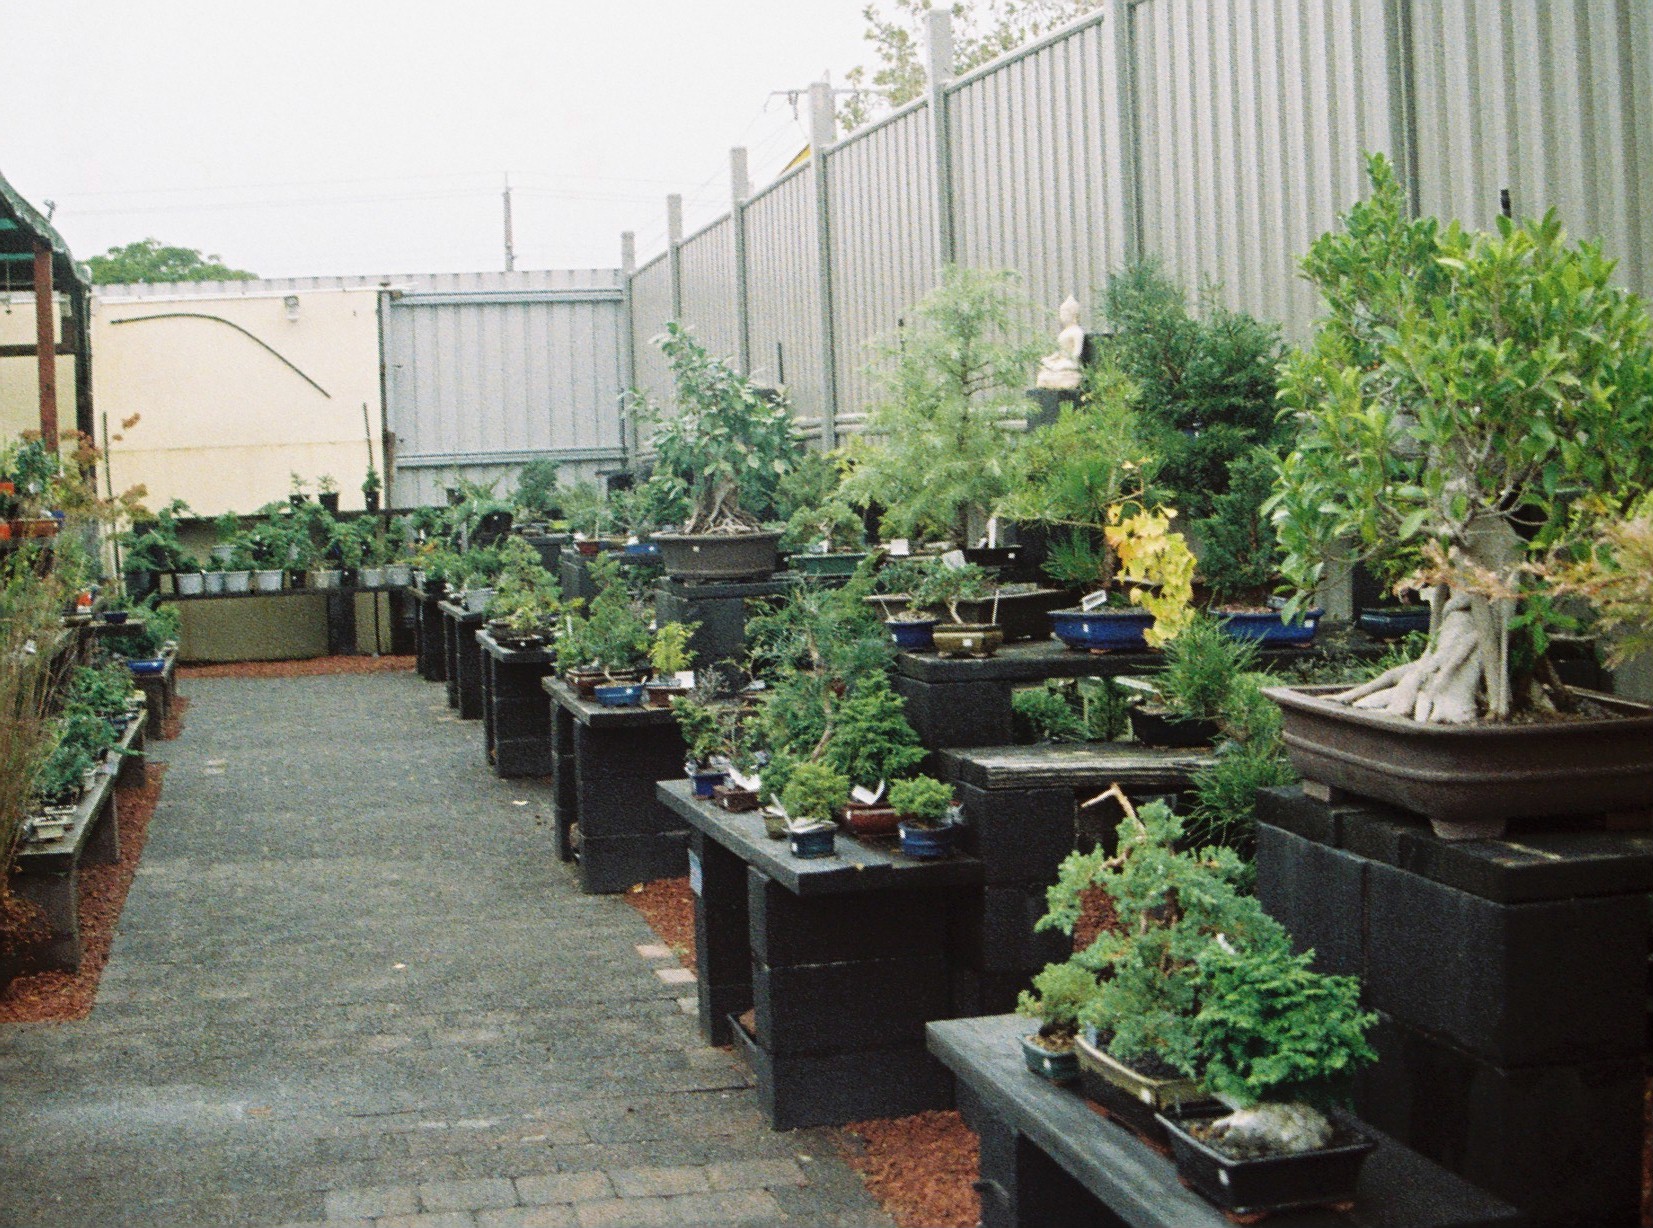 an outdoor greenhouse is shown with many plants